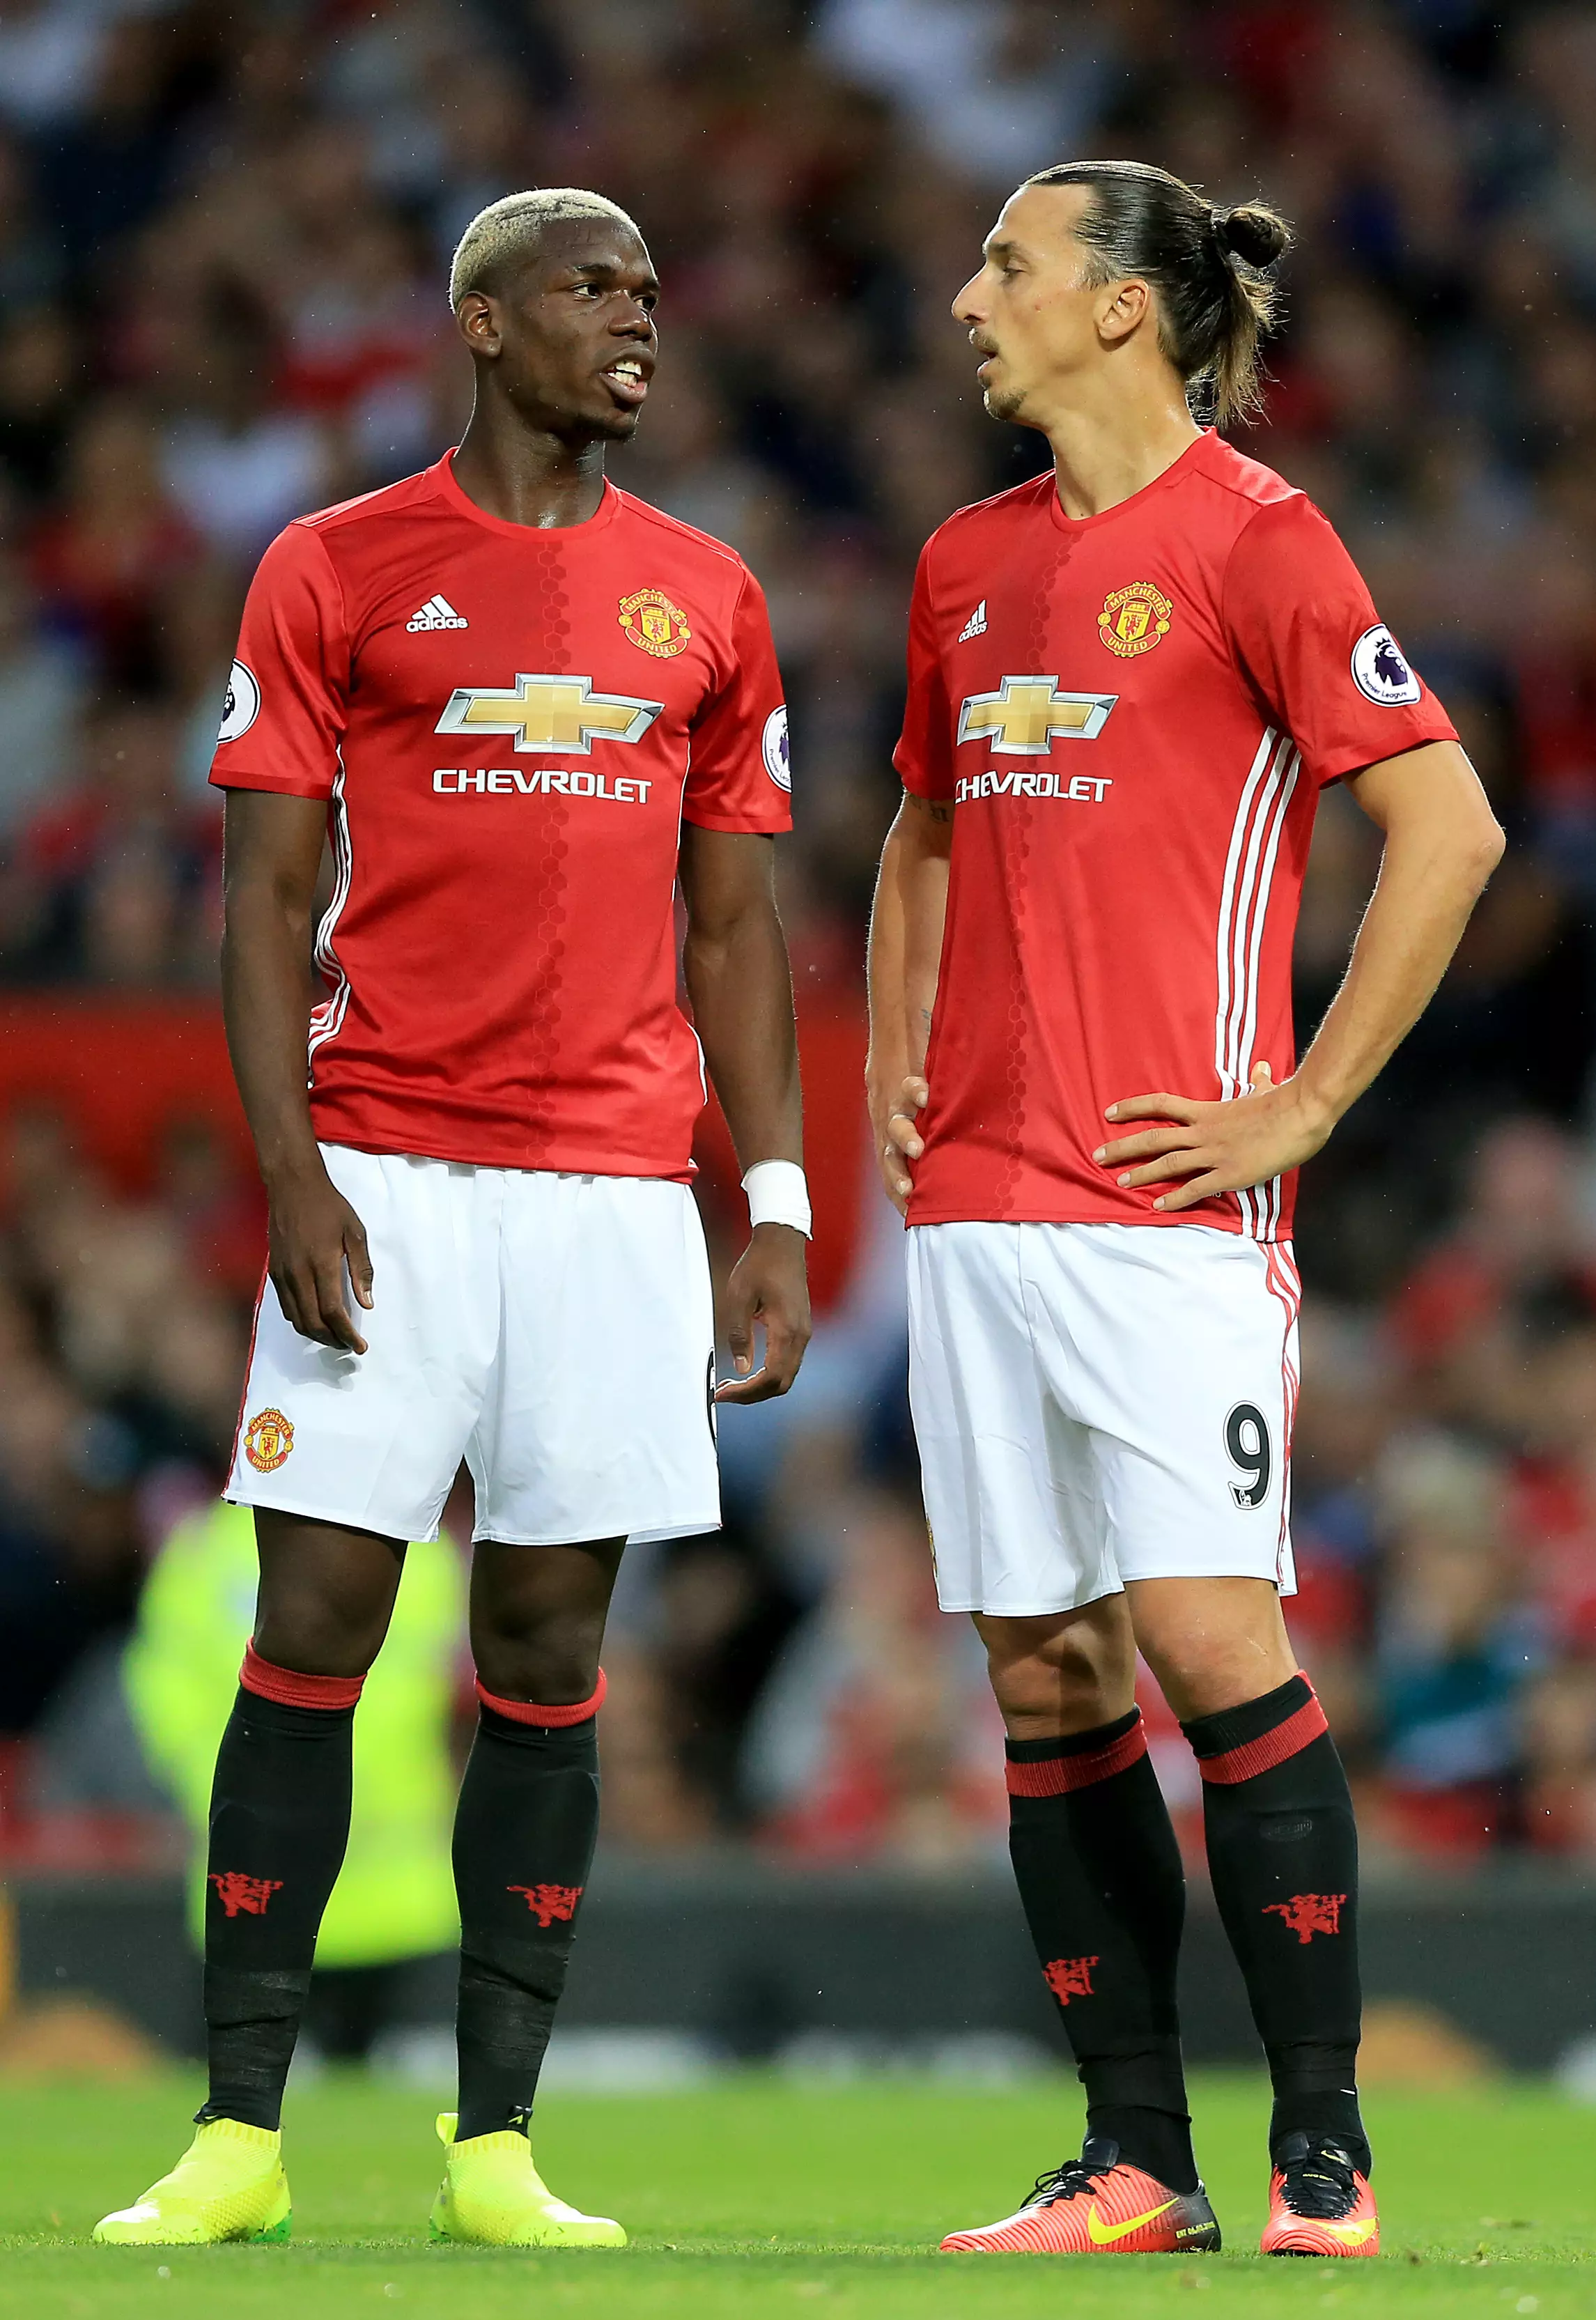 Paul Pogba and Zlatan Ibrahimovic together at Manchester United. Image: PA Images